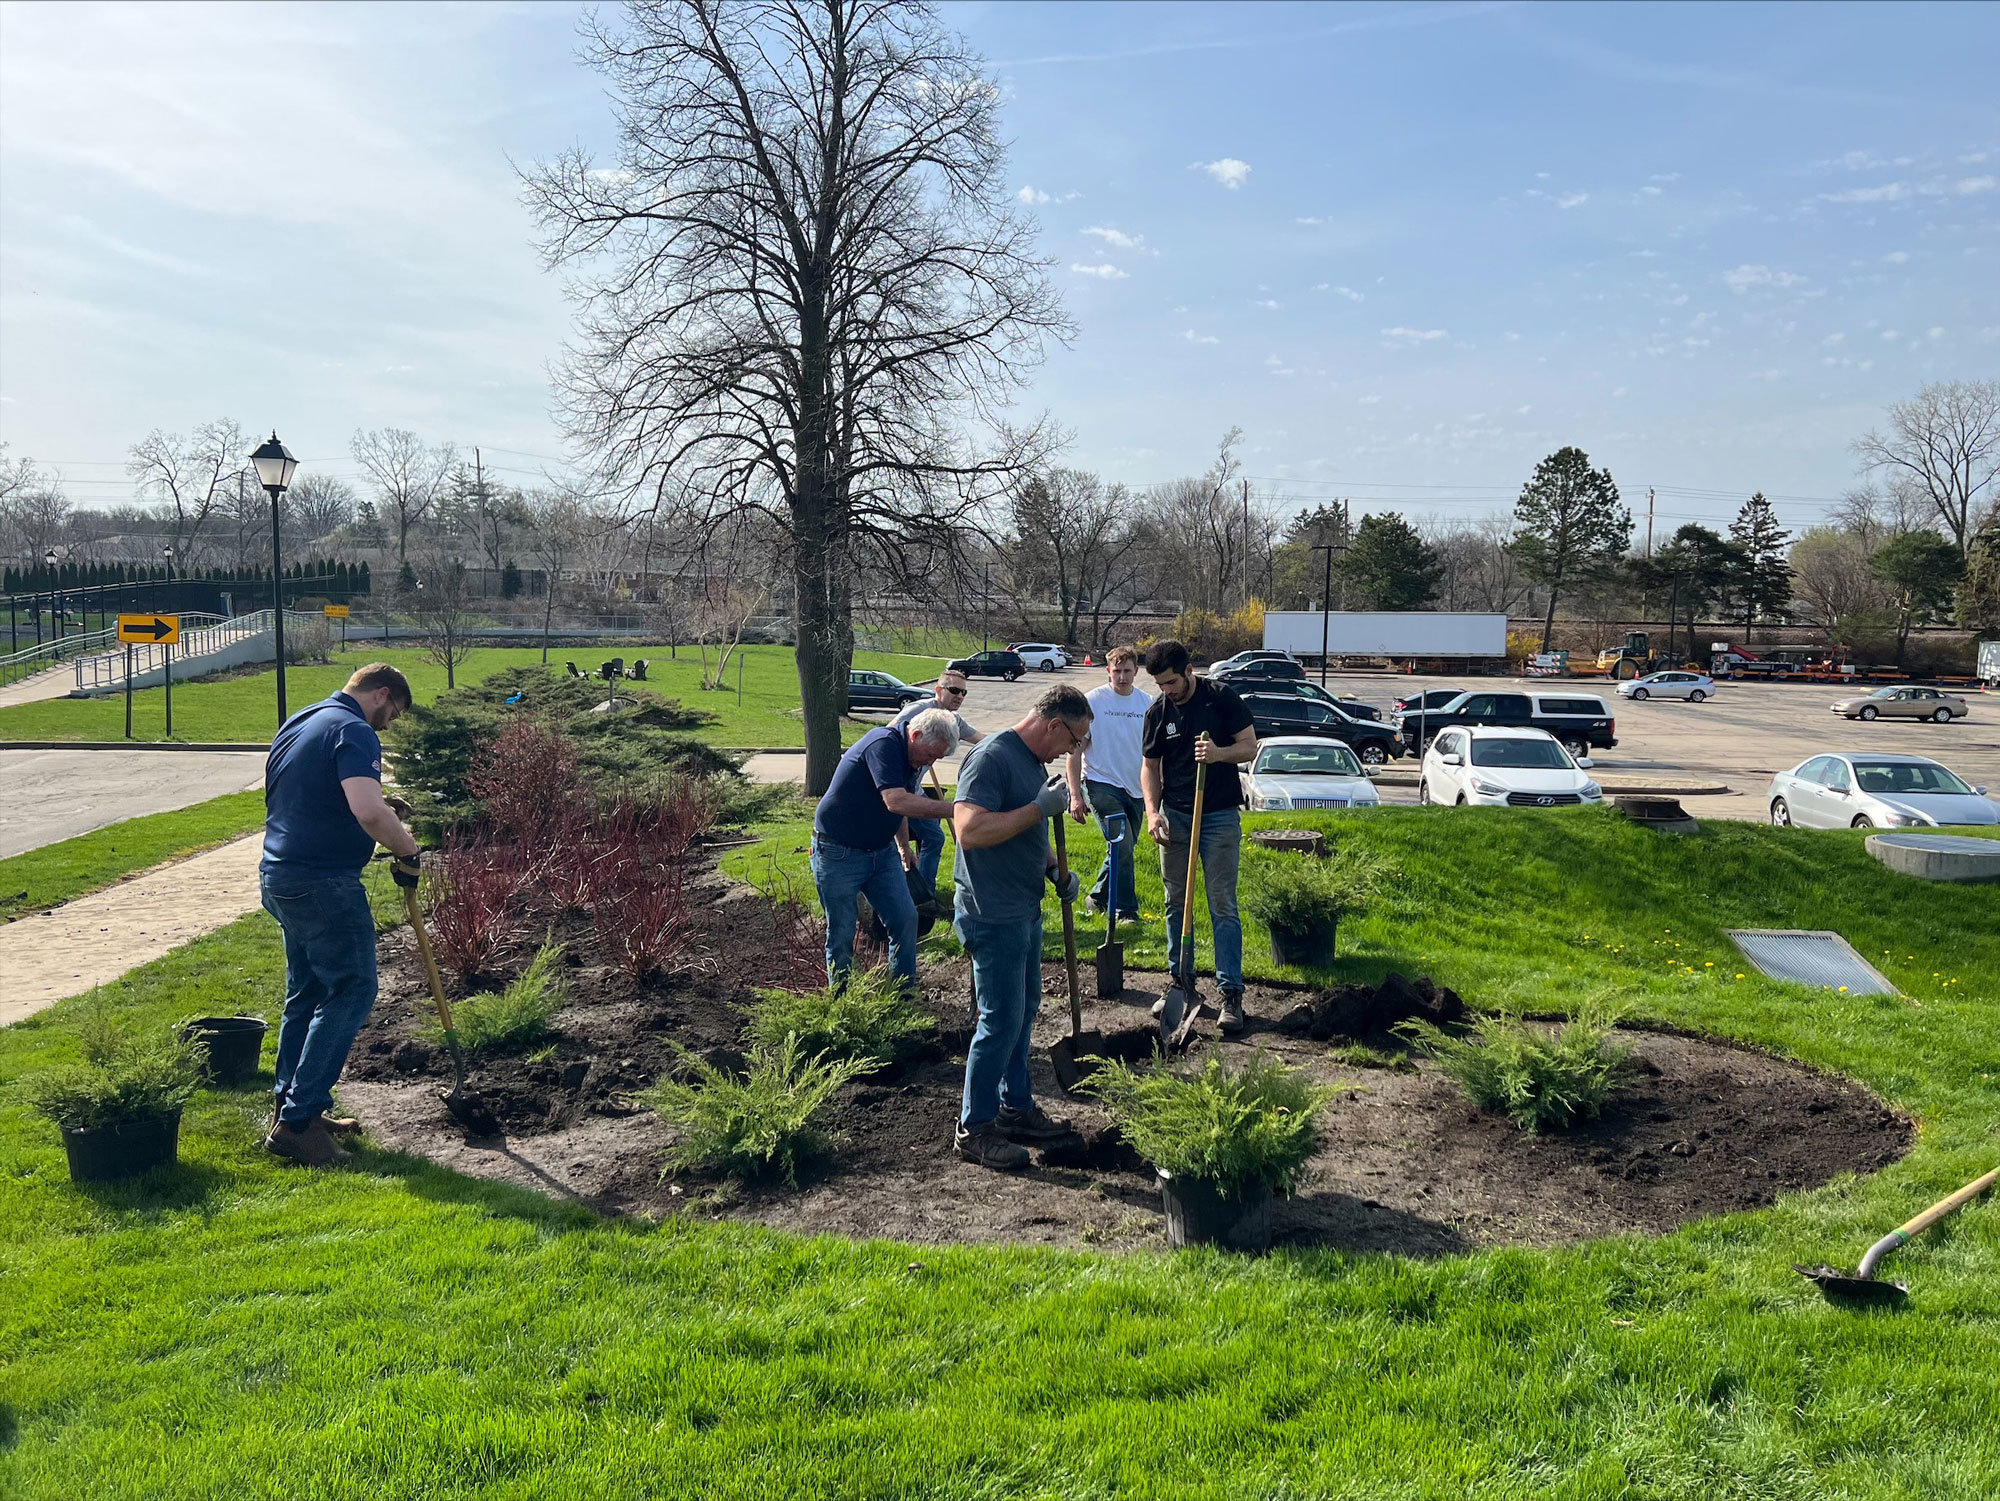 Volunteers and staff work on planting shrubs on campus